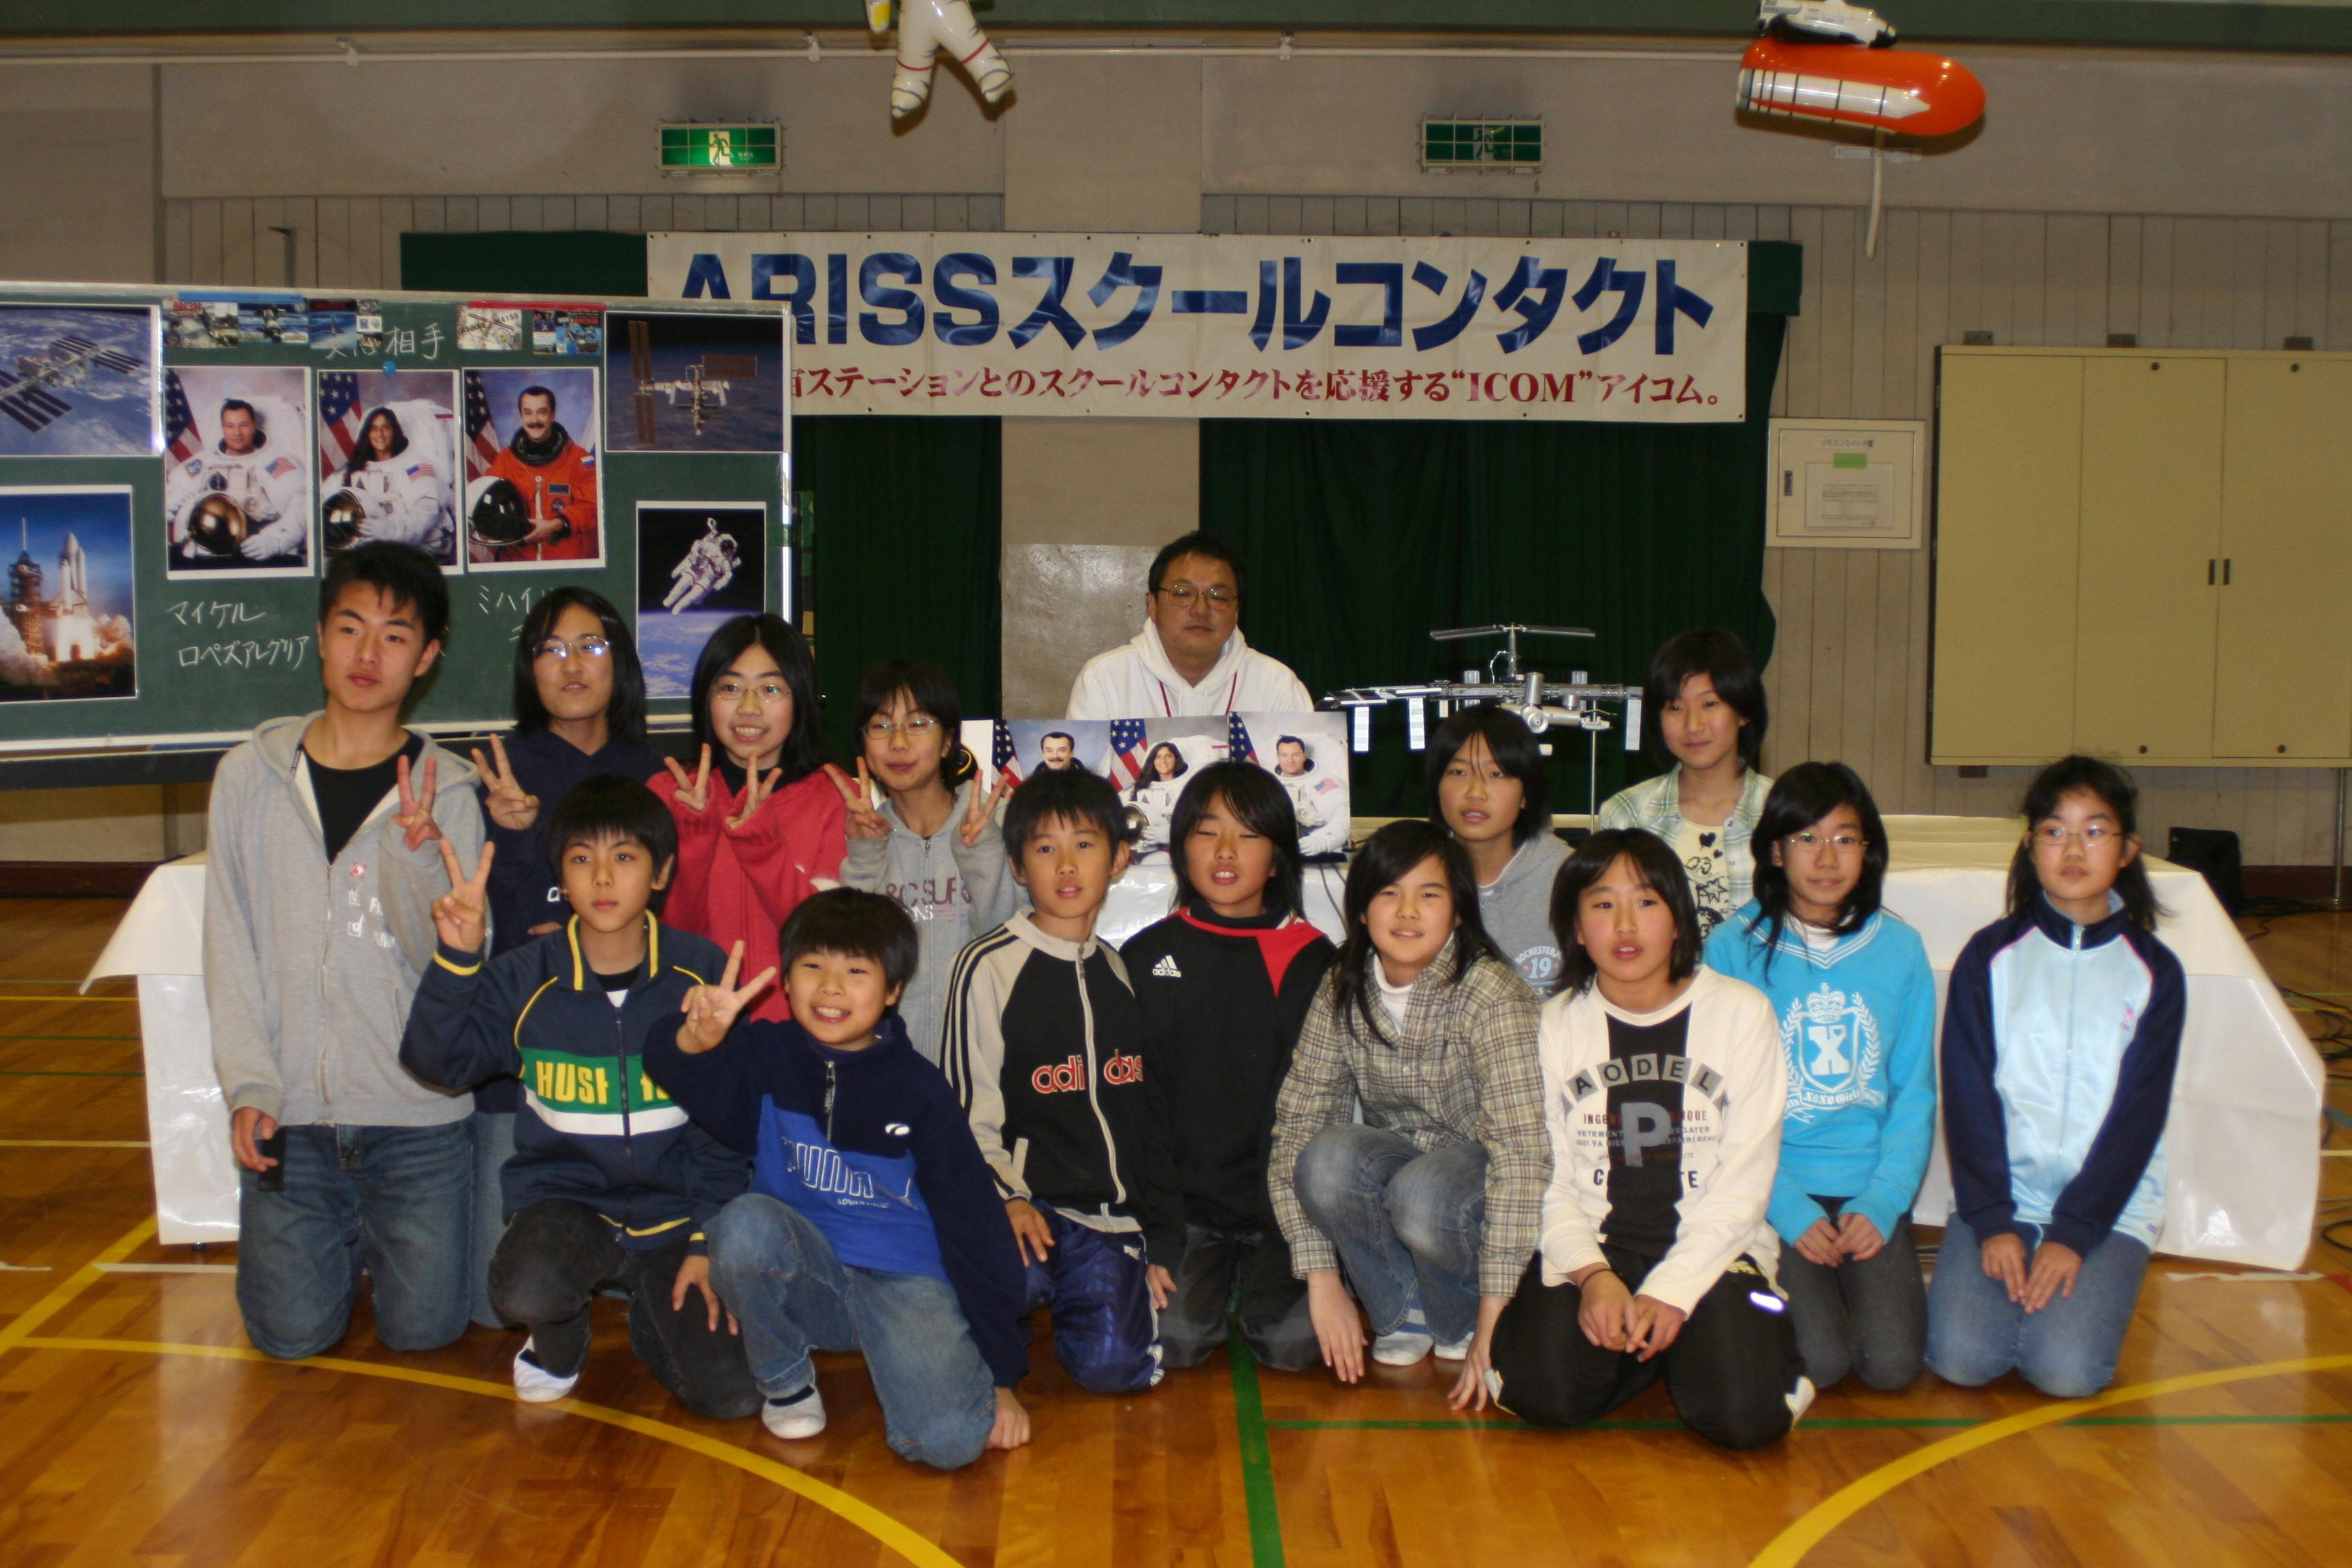 Students attending Hanazono Elementary School in Akashi-city, Japan get together for an ARISS contact with Sunita Williams in February 2007. Image courtesy of Satoshi Yasuda, 7M3TJZ. Credit: NASA